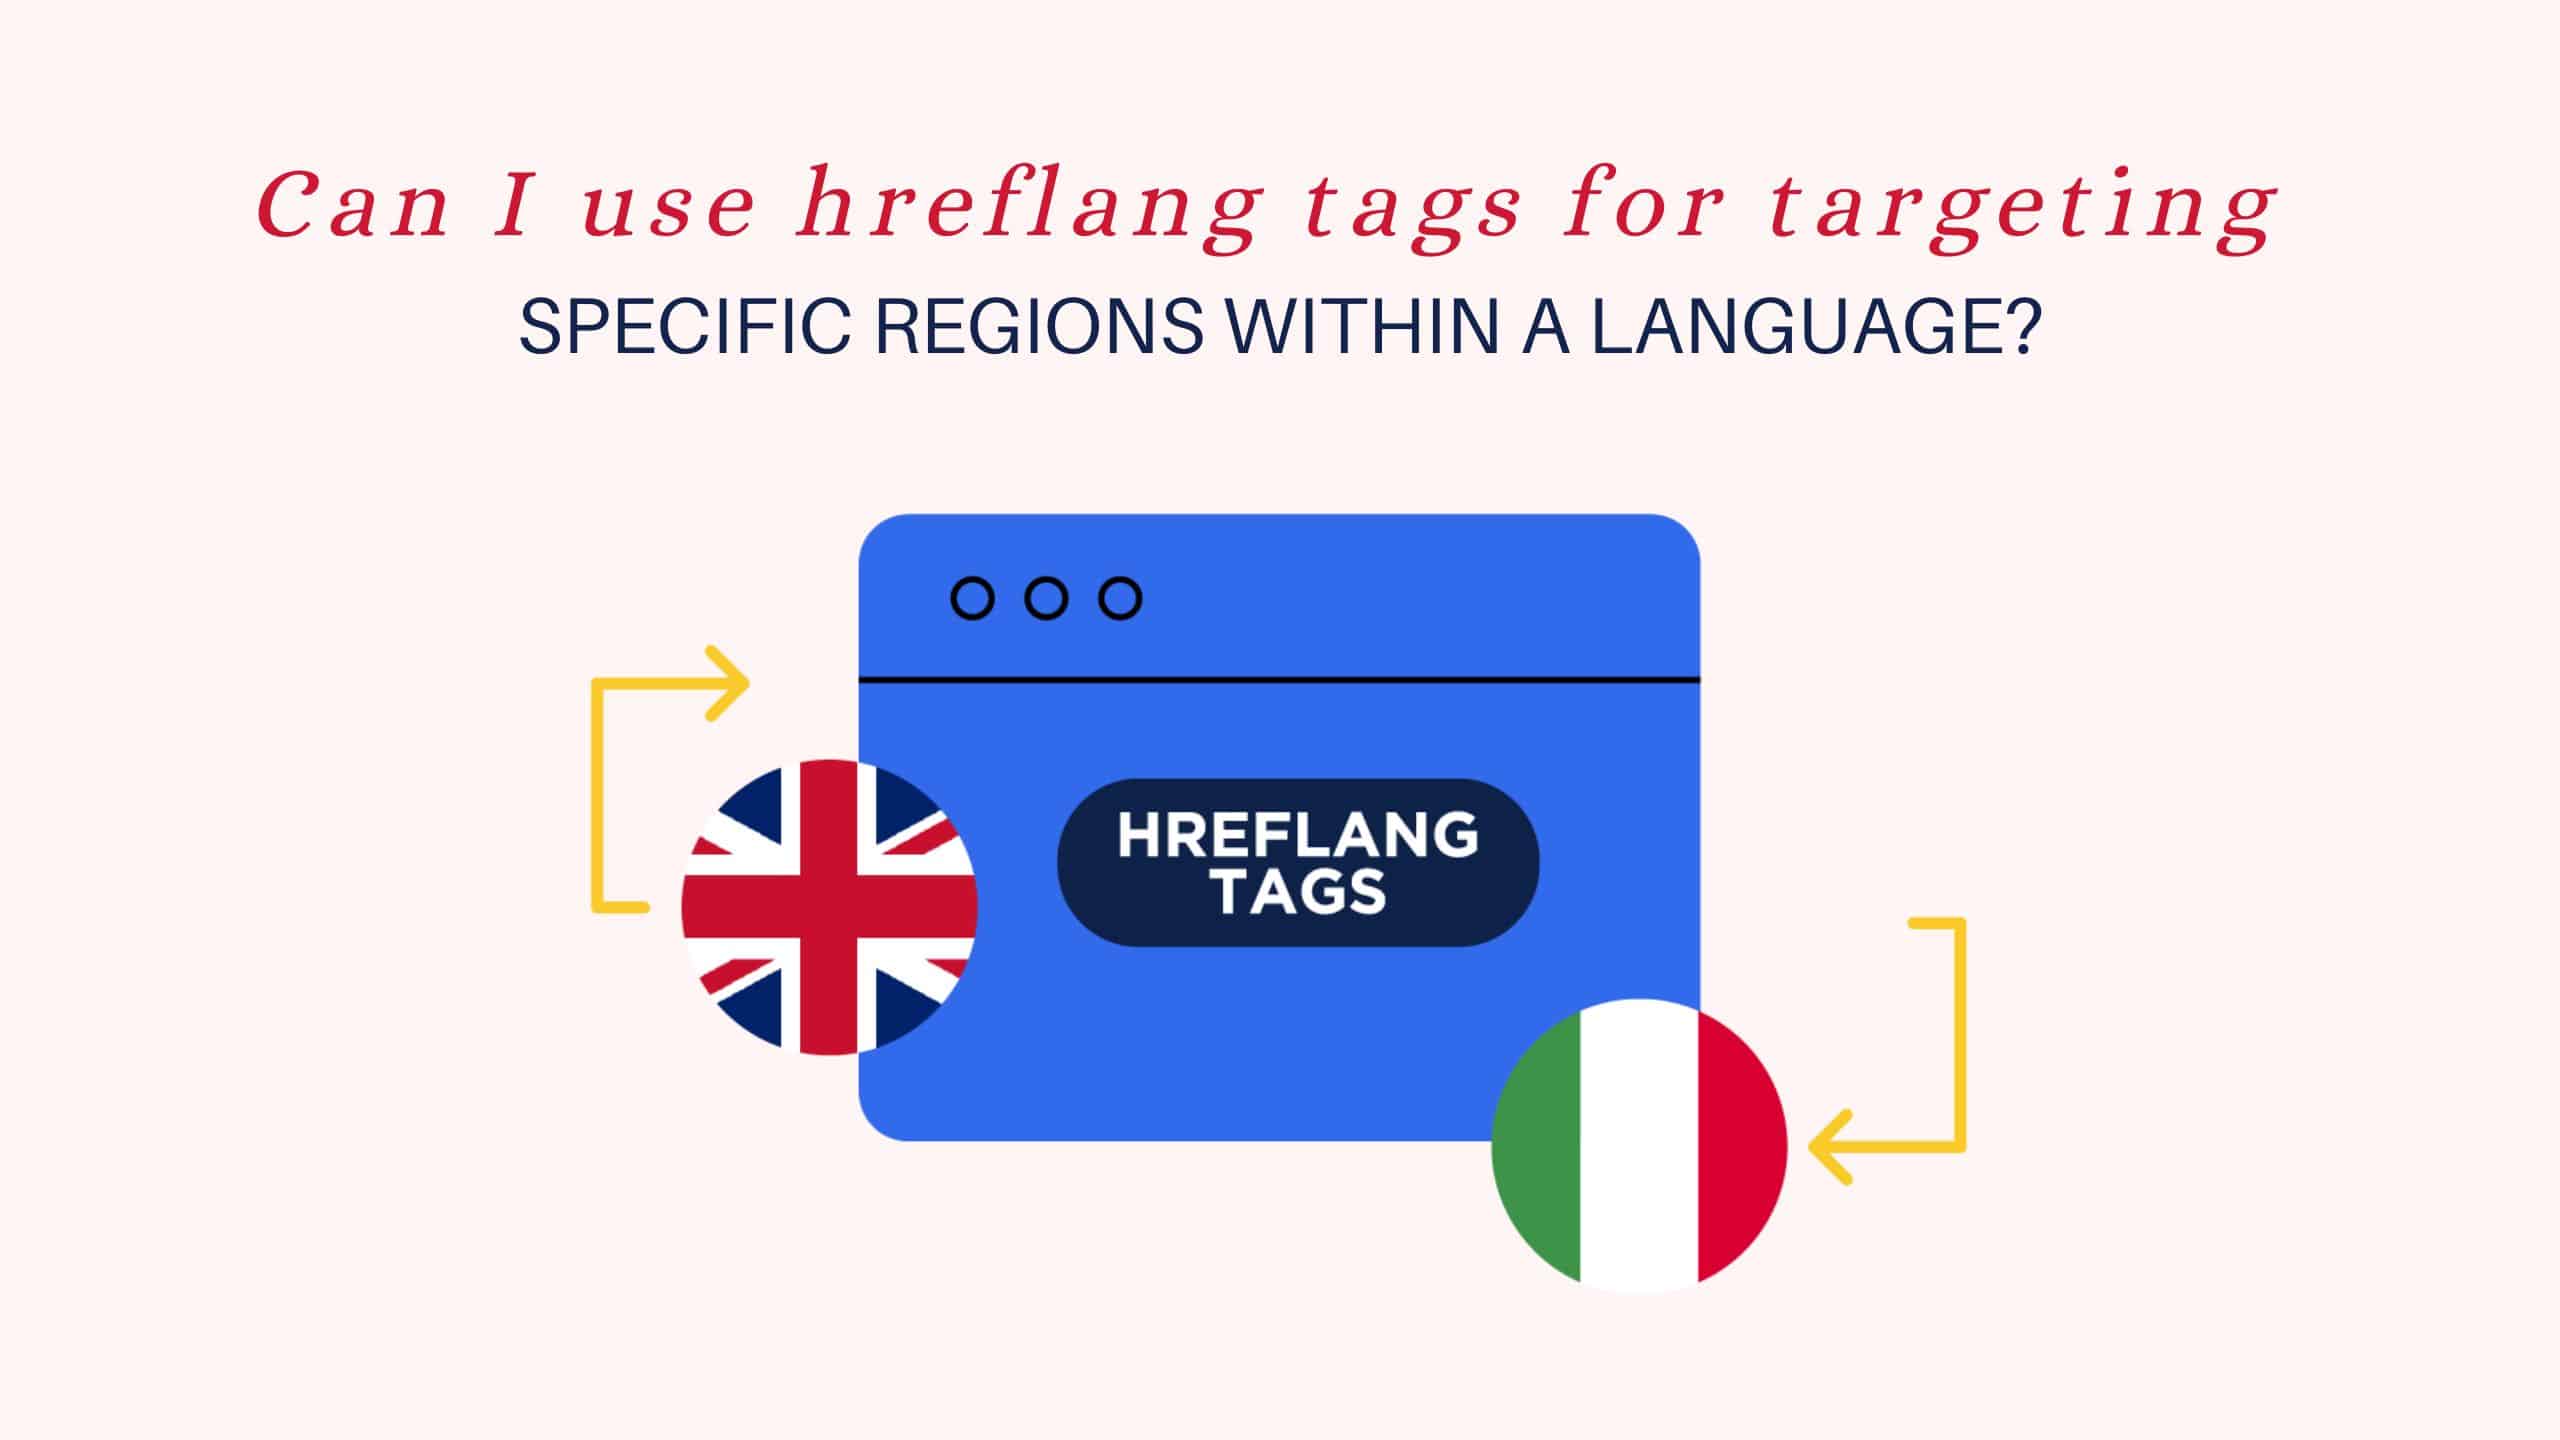 a href regex, a href tag syntax, a href tags, f-tags, how to fix hreflang tags with errors, hreflang best practices, hreflang es-sp, hreflang examples, hreflang format, hreflang in sitemap, hreflang links, hreflang mdn, hreflang return tag, hreflang sitemap, hreflang tag example, Hreflang Tags, Hreflang tags for specific regions language, Hreflang tags for targeting a language, Hreflang tags for targeting specific regions, Hreflang tags for targeting specific regions within a language?, hreflang tags using target regions, hreflang values, hreflang xml sitemap, html hreflang spanish, k-tags, lf-tags, link hreflang, specific regions within a language, tags in url, targeted reference link, url tags html, what are hreflang tags, x default hreflang, z-tags